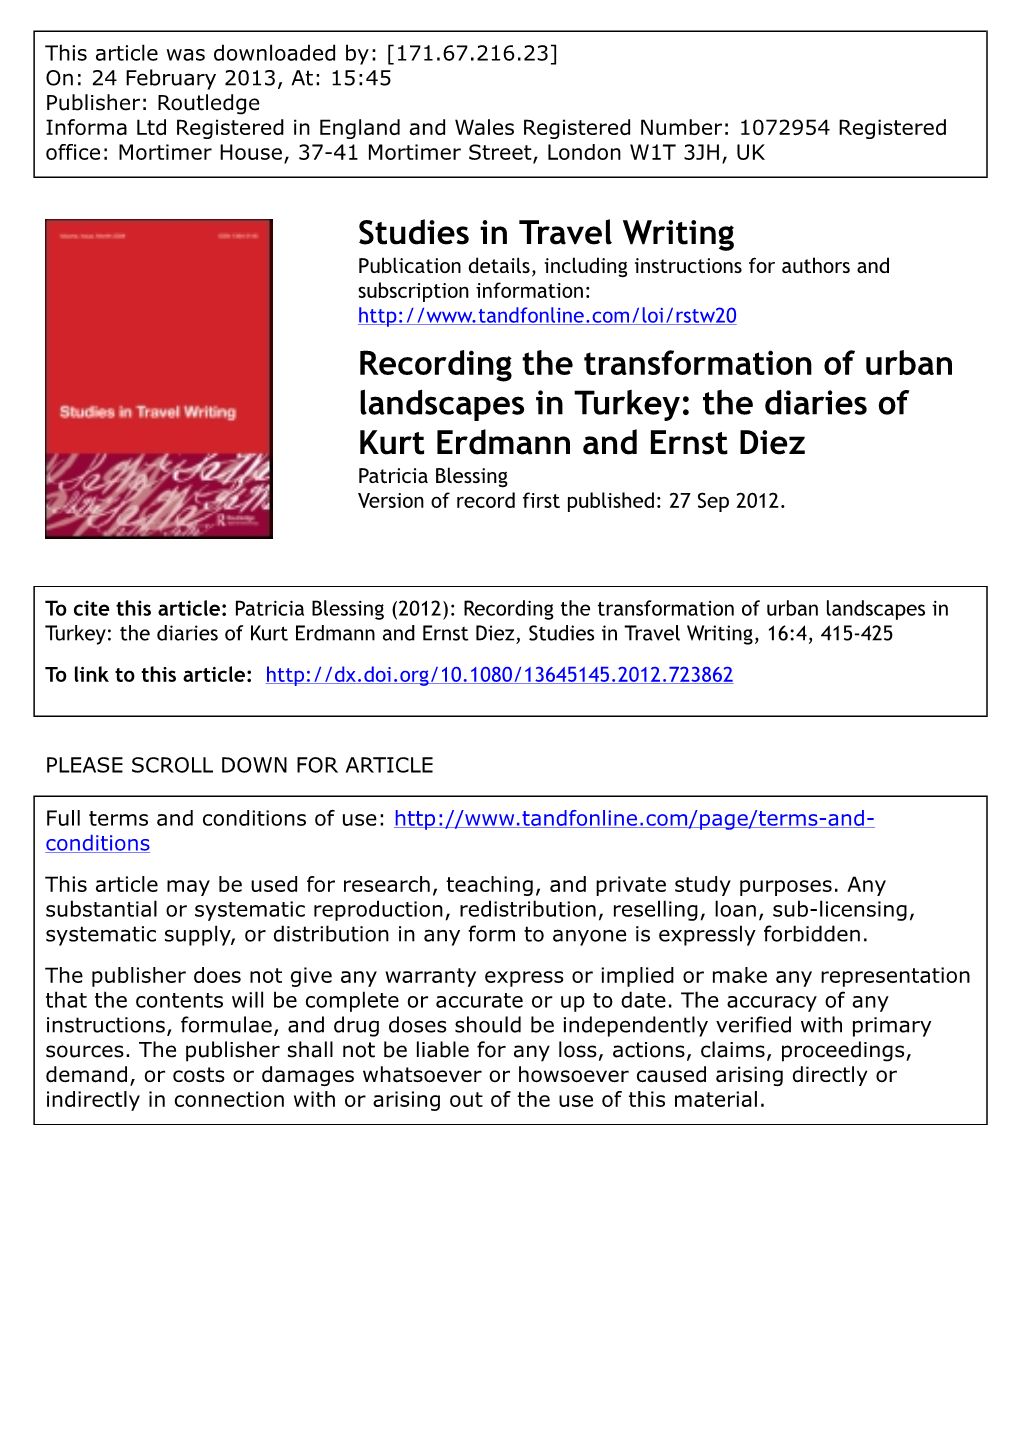 Recording the Transformation of Urban Landscapes in Turkey: the Diaries Of